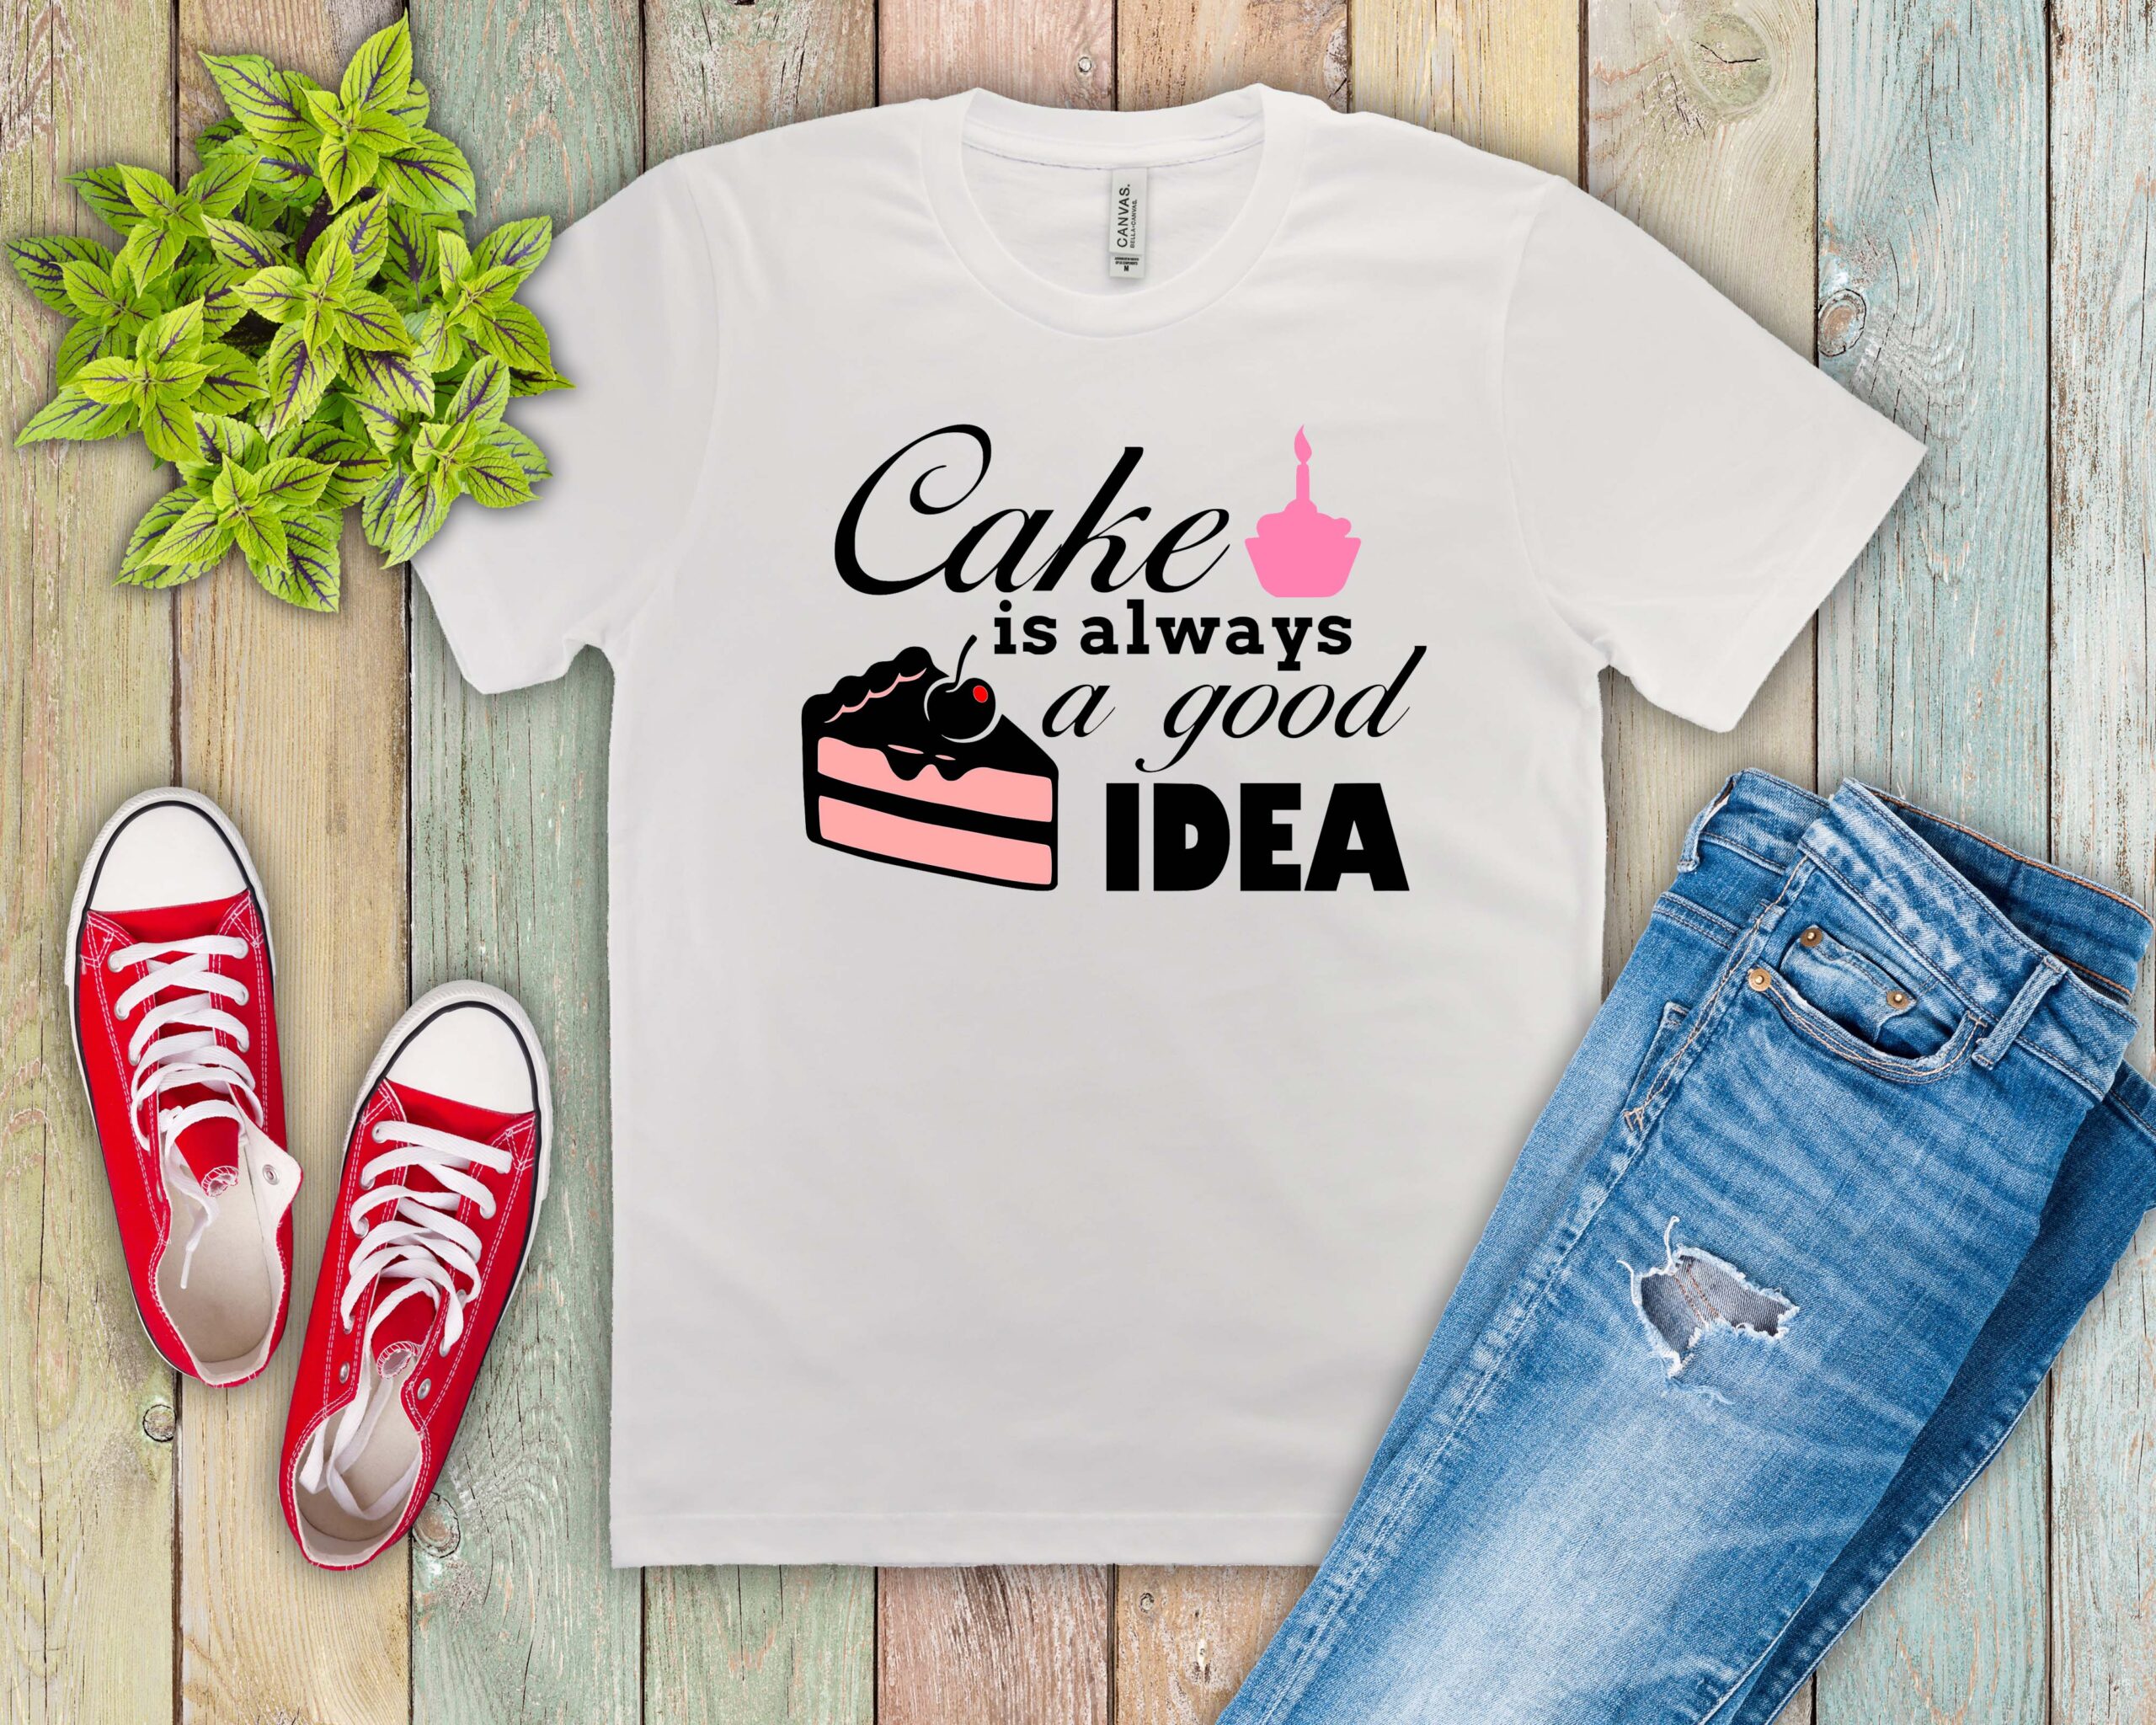 Free Cake is always a good Idea SVG Cutting File for the Cricut.